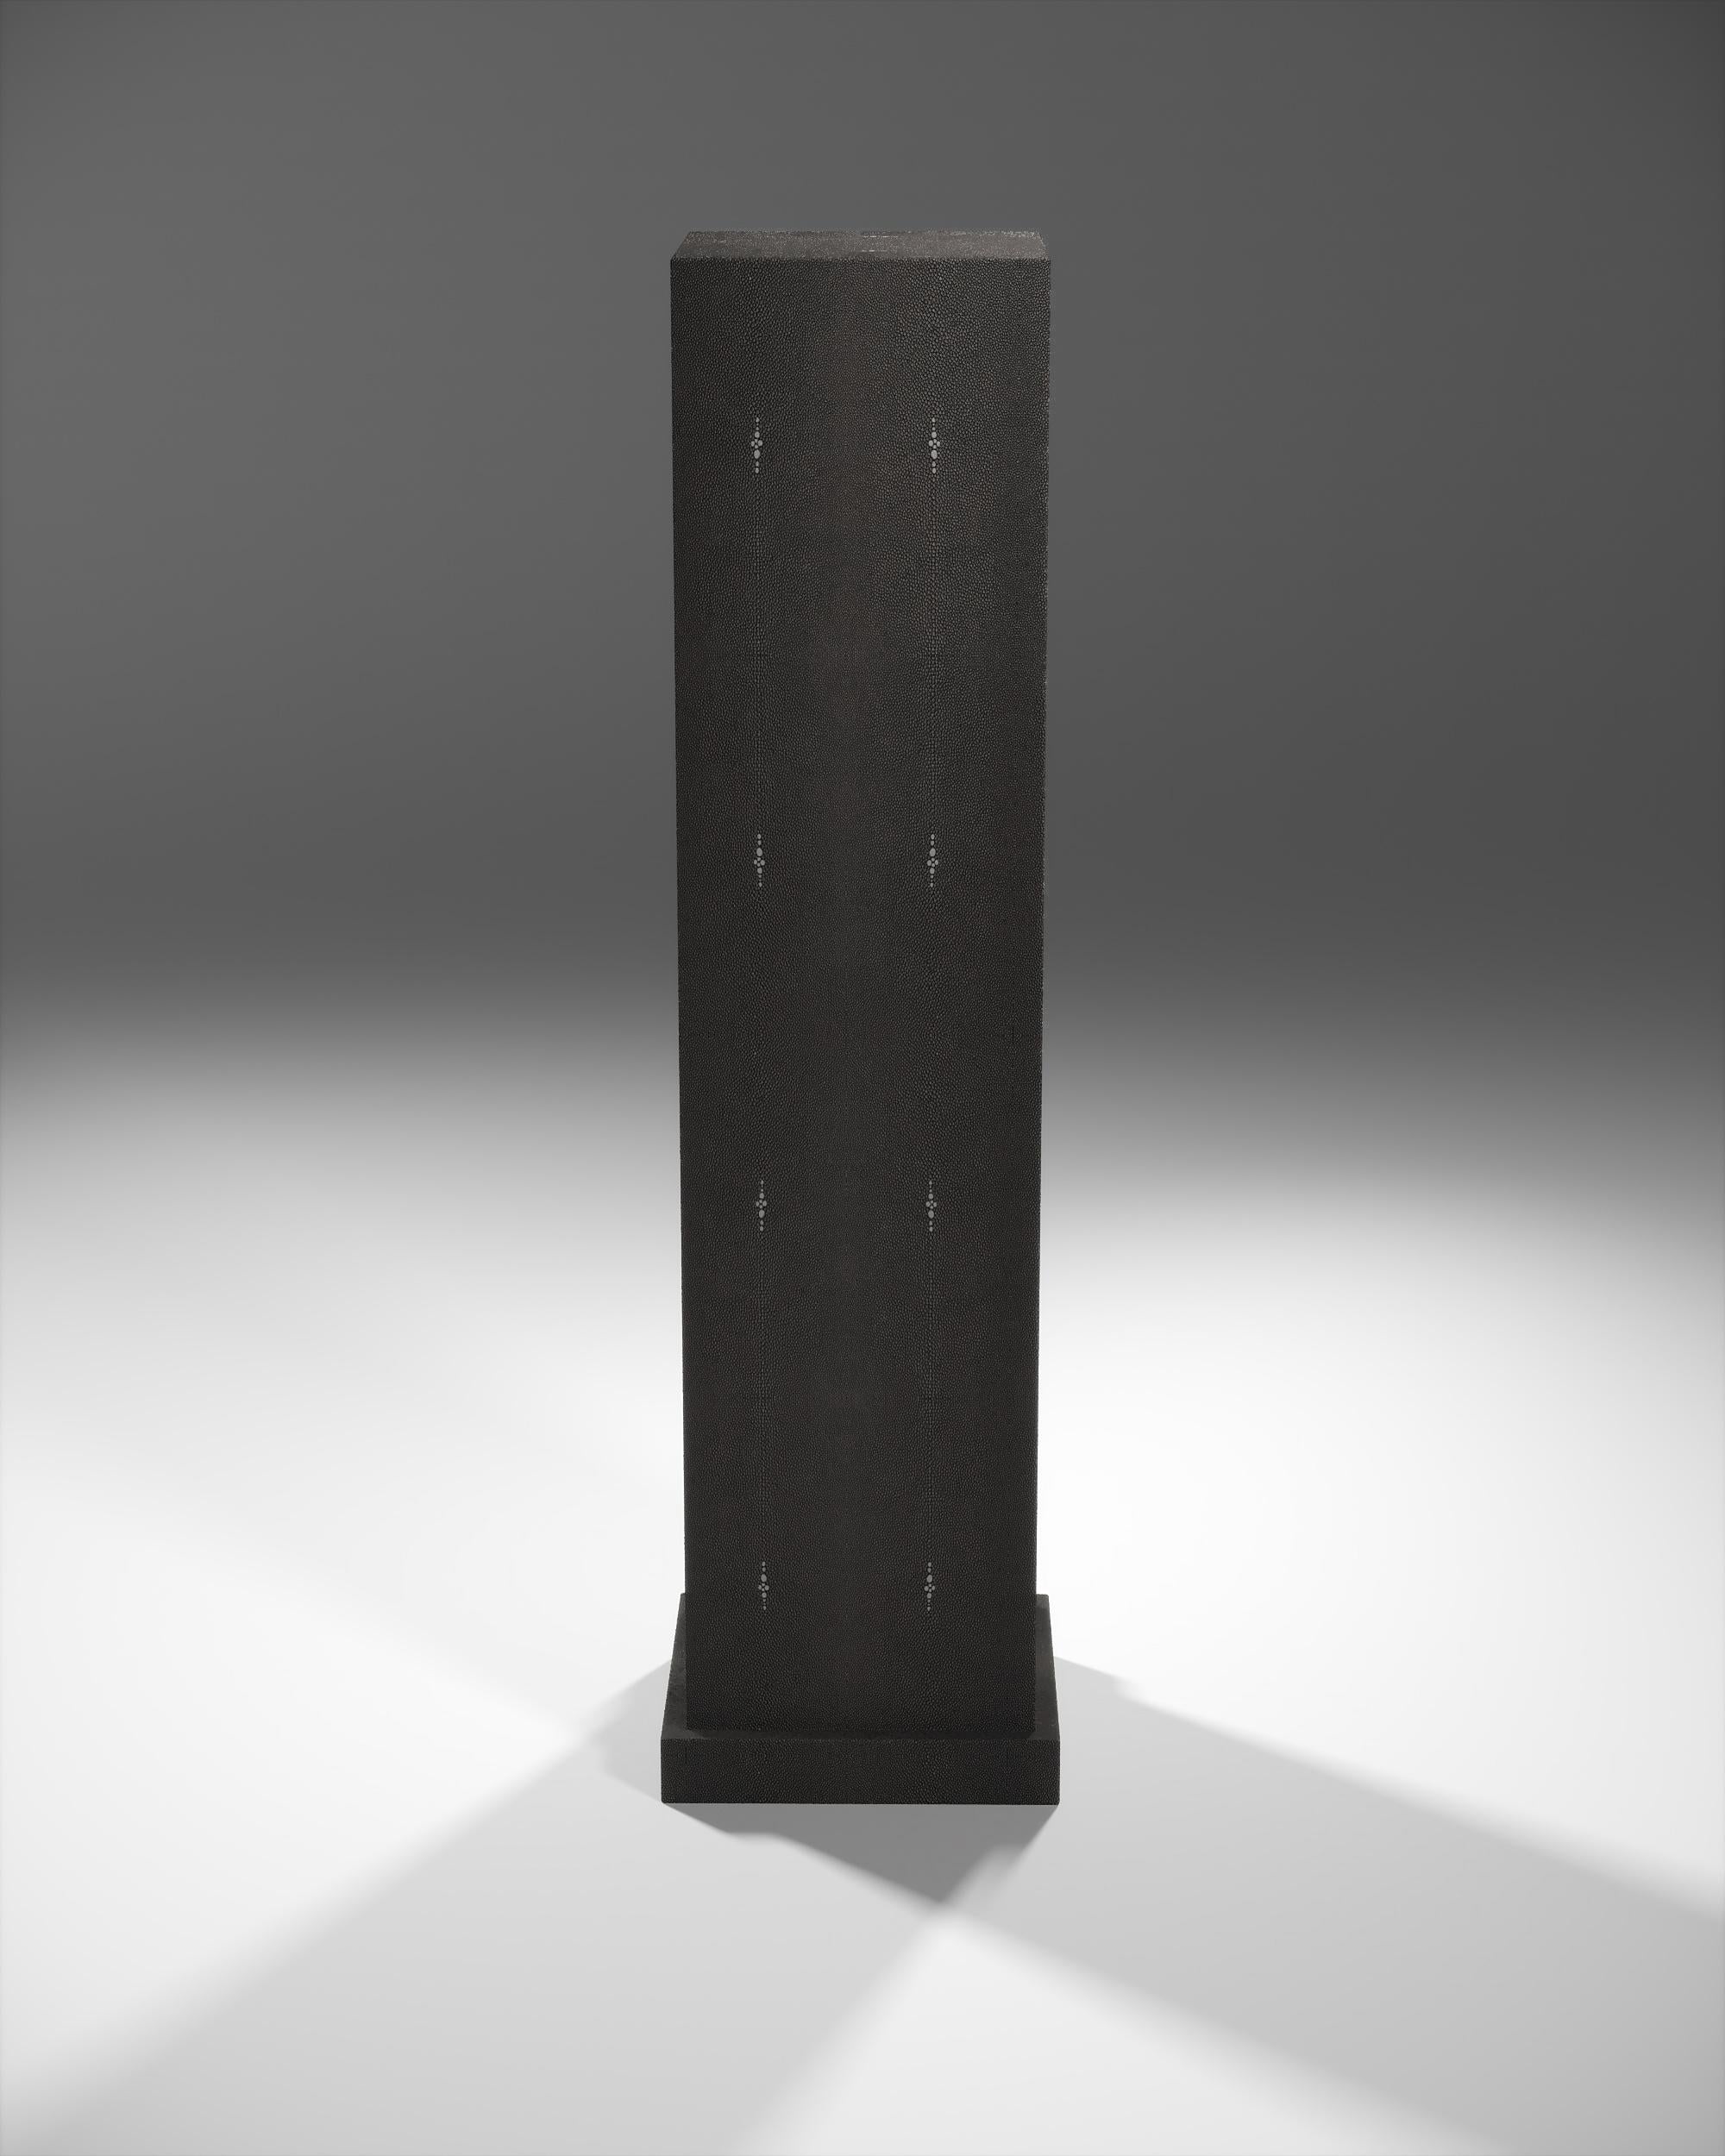 This column in coal black shagreen by R&Y Augousti is the ultimate luxury accent piece to support any decorative objet and make it truly stand out. The design is pure with its clean aesthetic, allowing the beauty of the shagreen inlay to stand out.